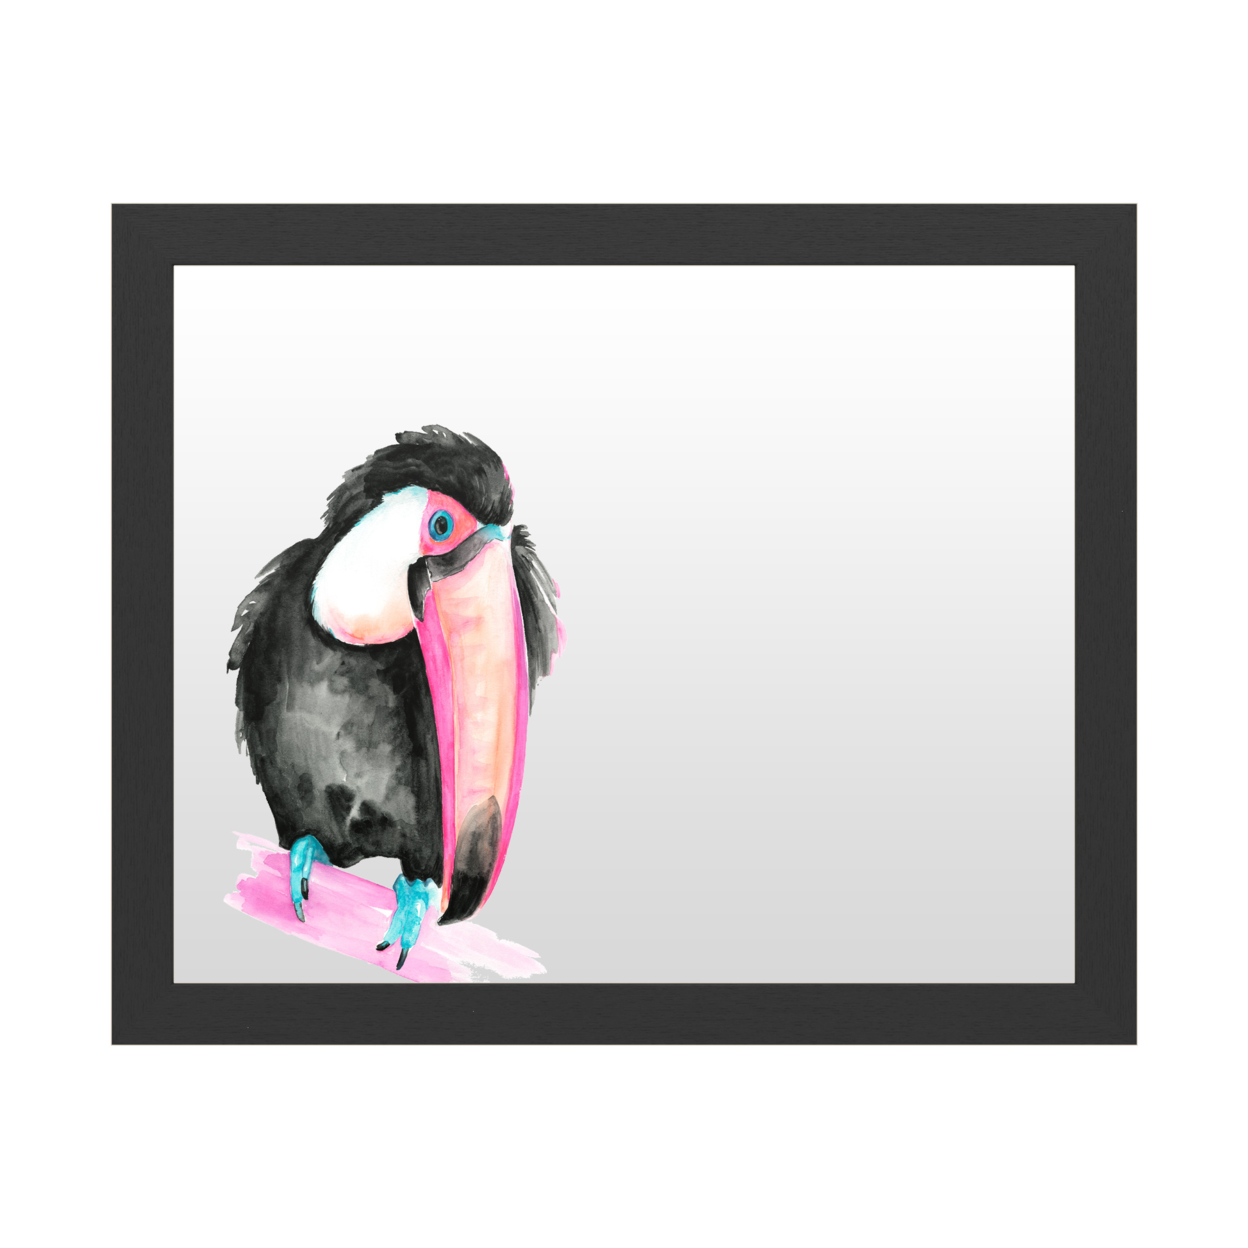 Dry Erase 16 X 20 Marker Board With Printed Artwork - Jennifer Paxton Parker Technicolor Toucan I White Board - Ready To Hang